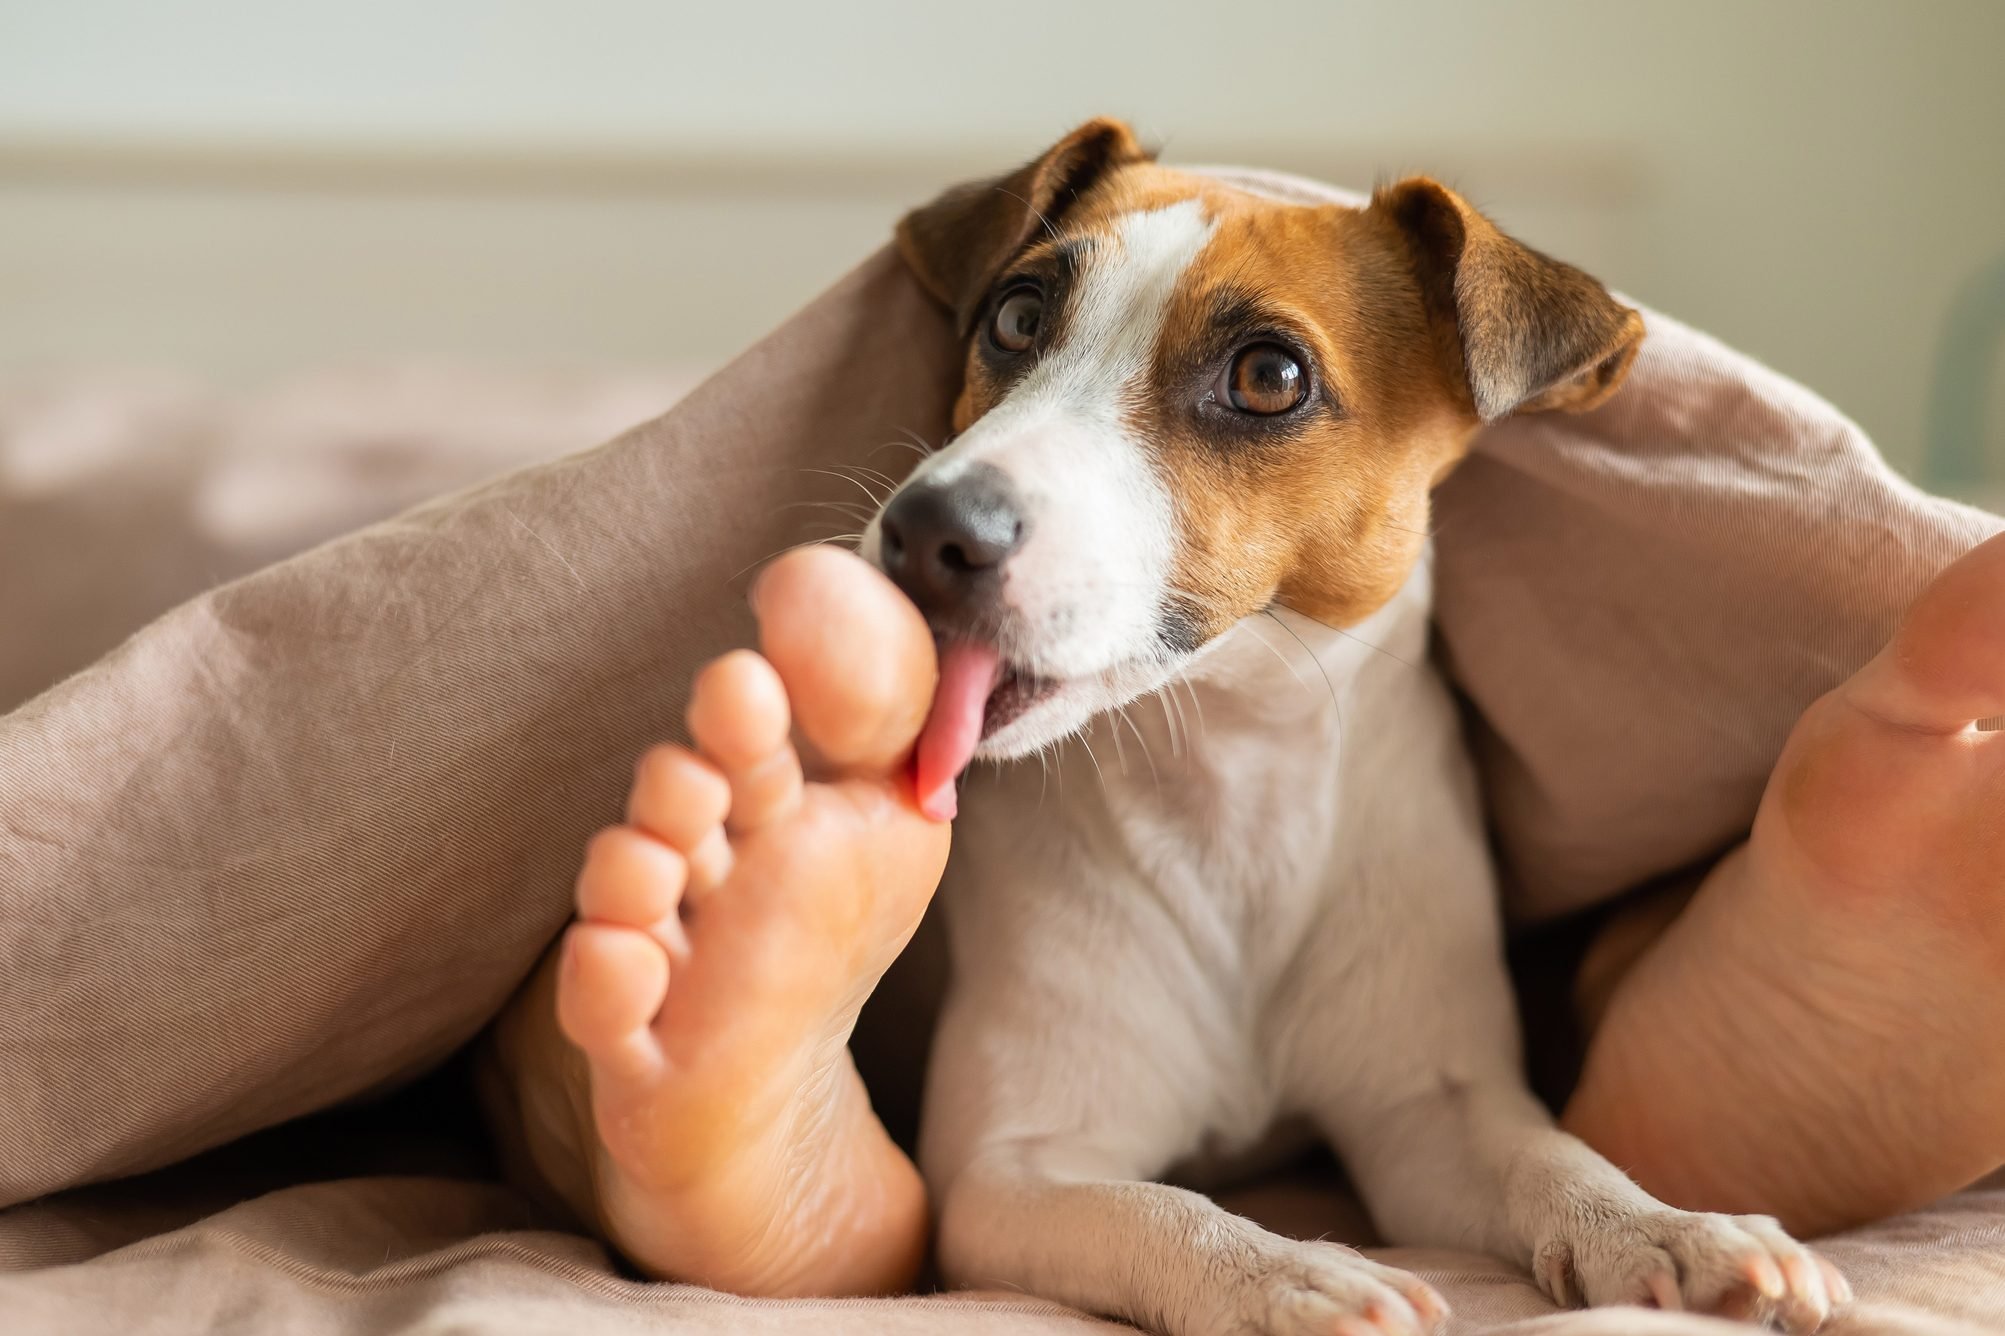 Why Do Dogs Lick Your Feet?